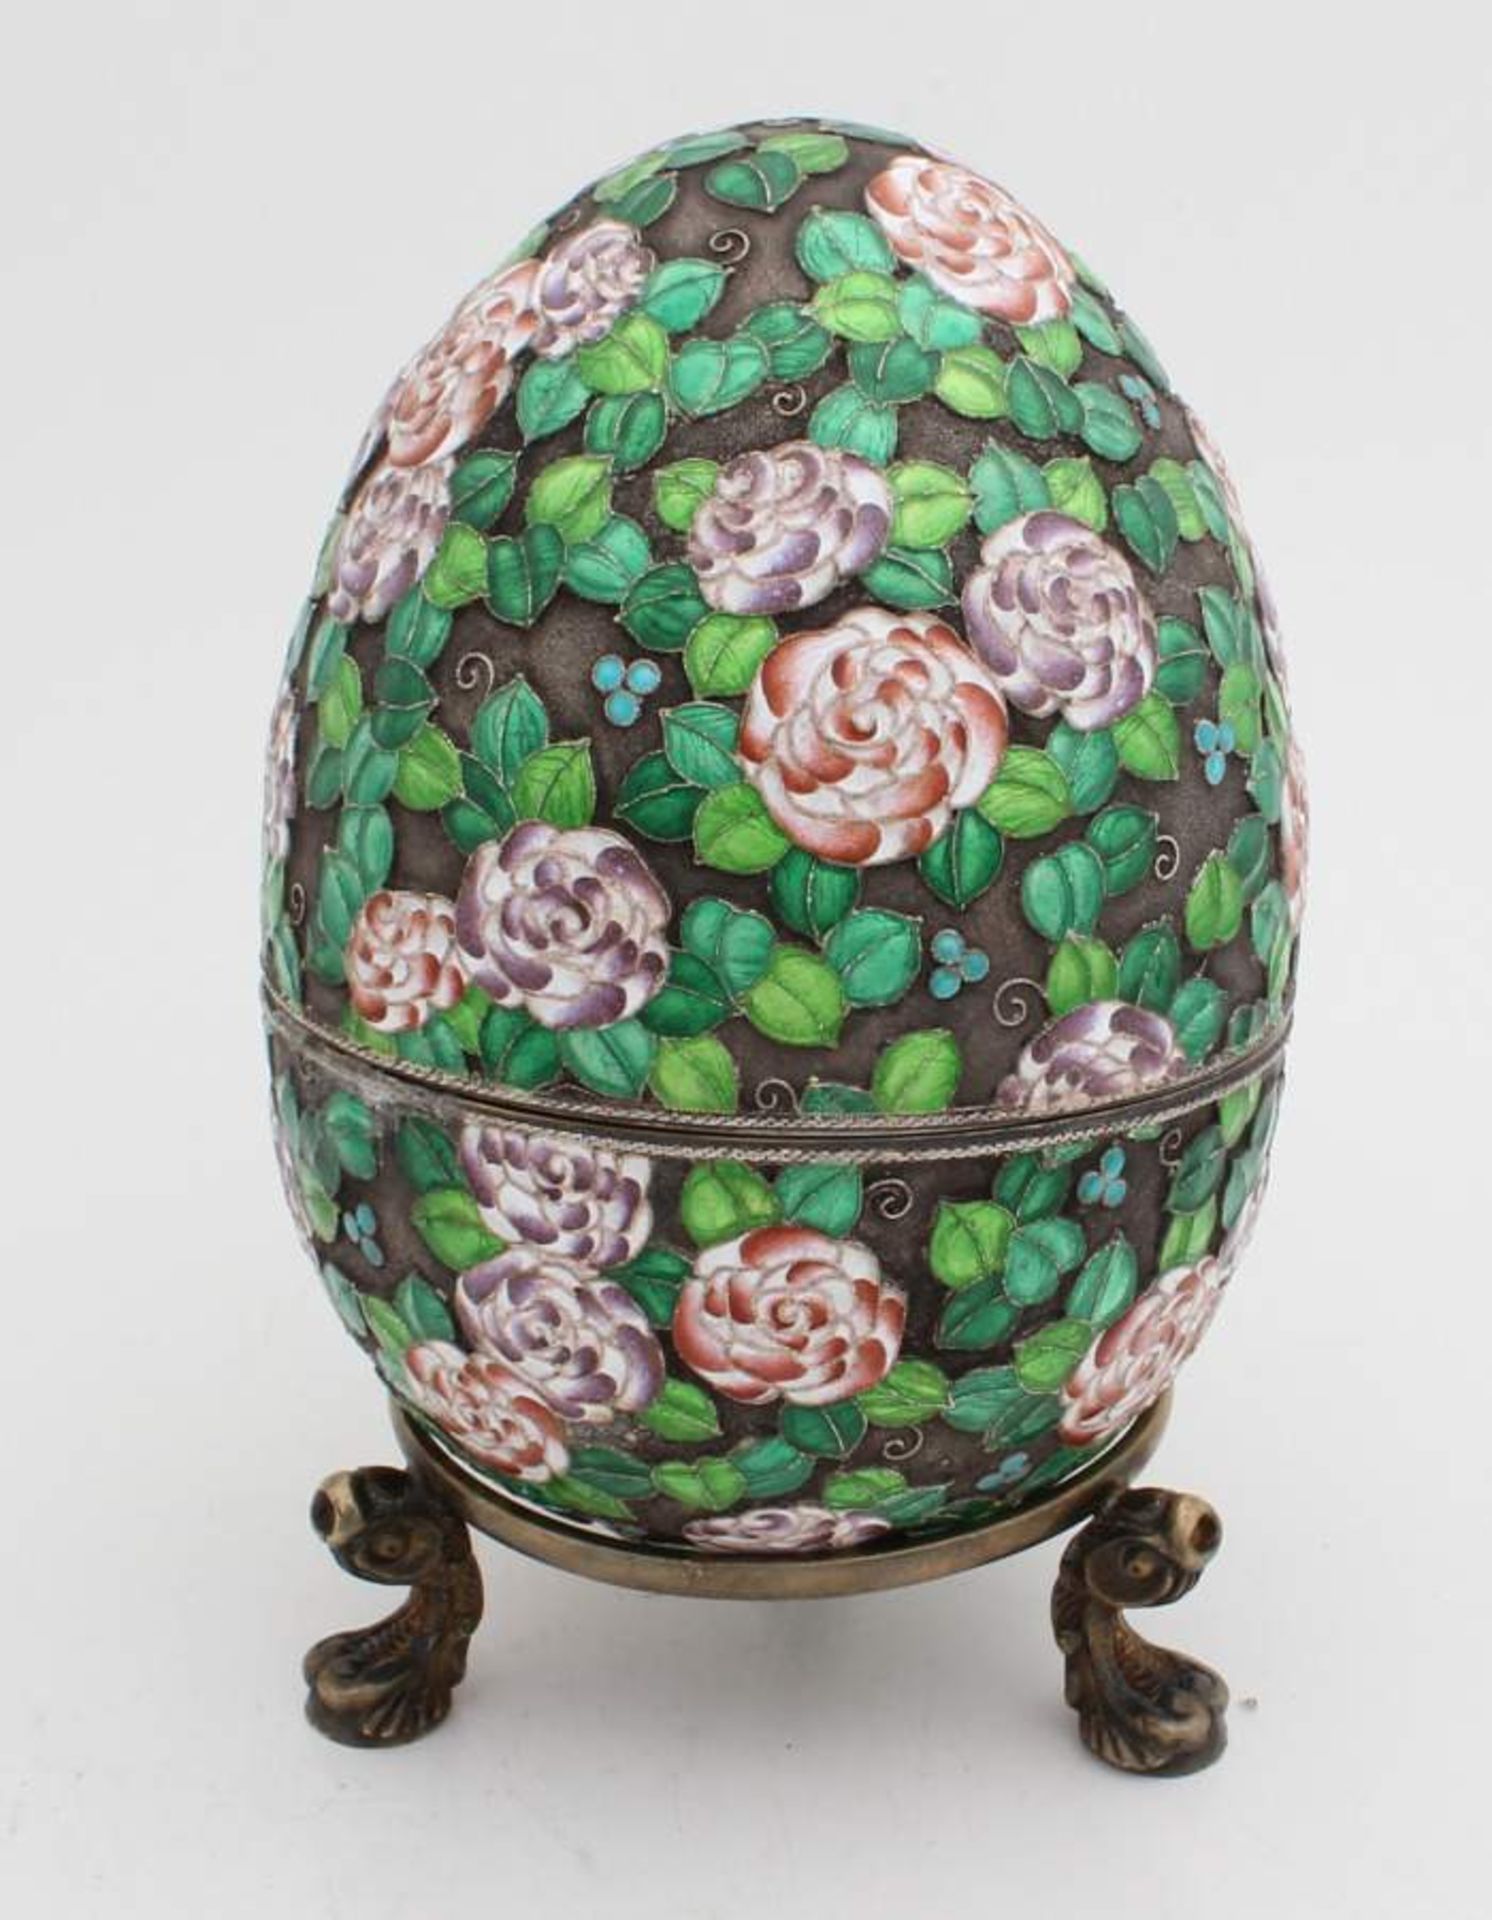 Silver egg with enamel on standard, 88 zolotniks. Beautifully decorated egg with rose and leaf motif